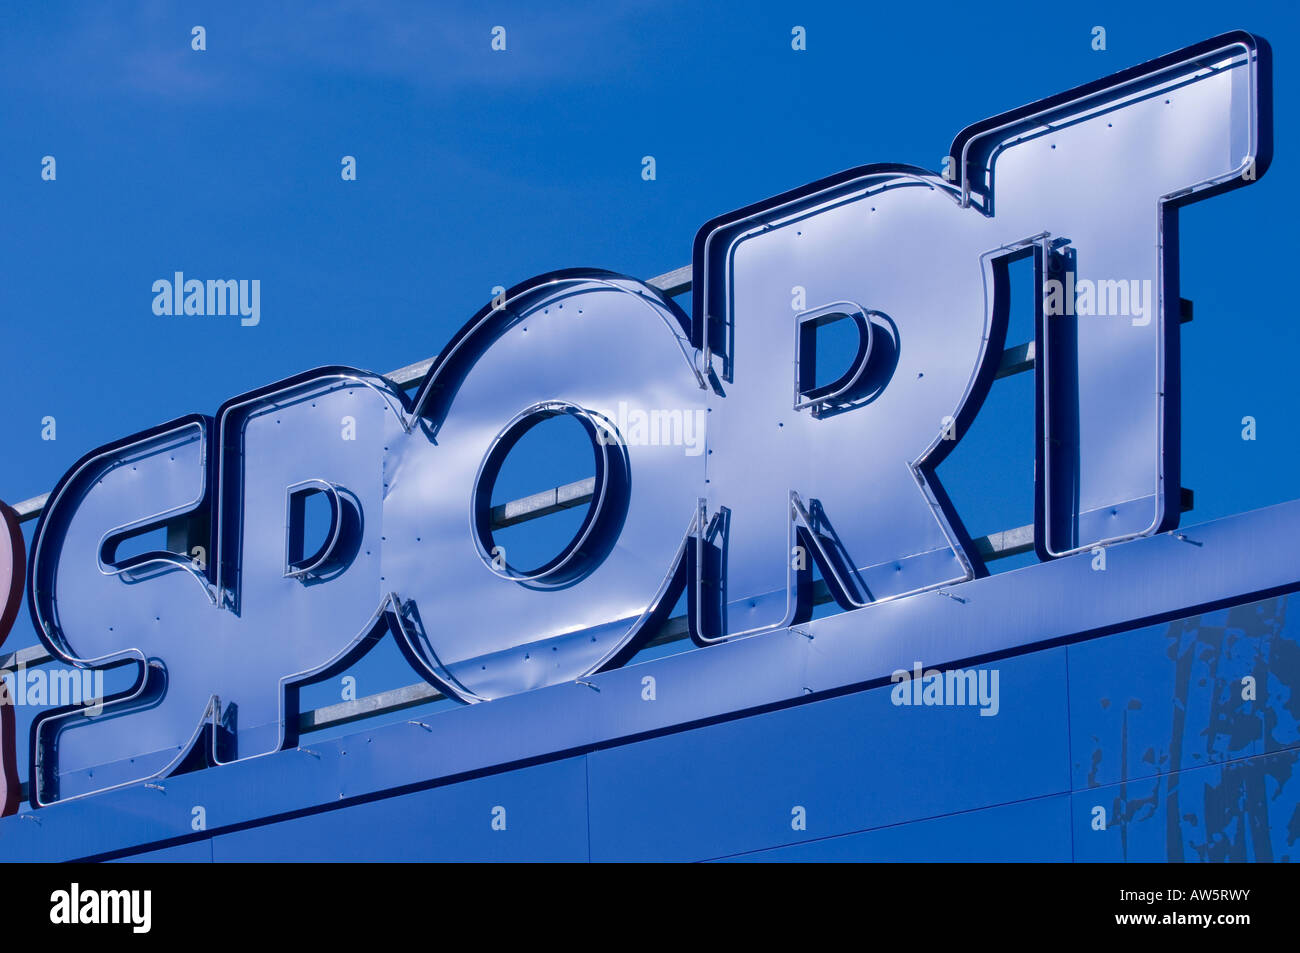 'Intersport' company sign, France. Stock Photo